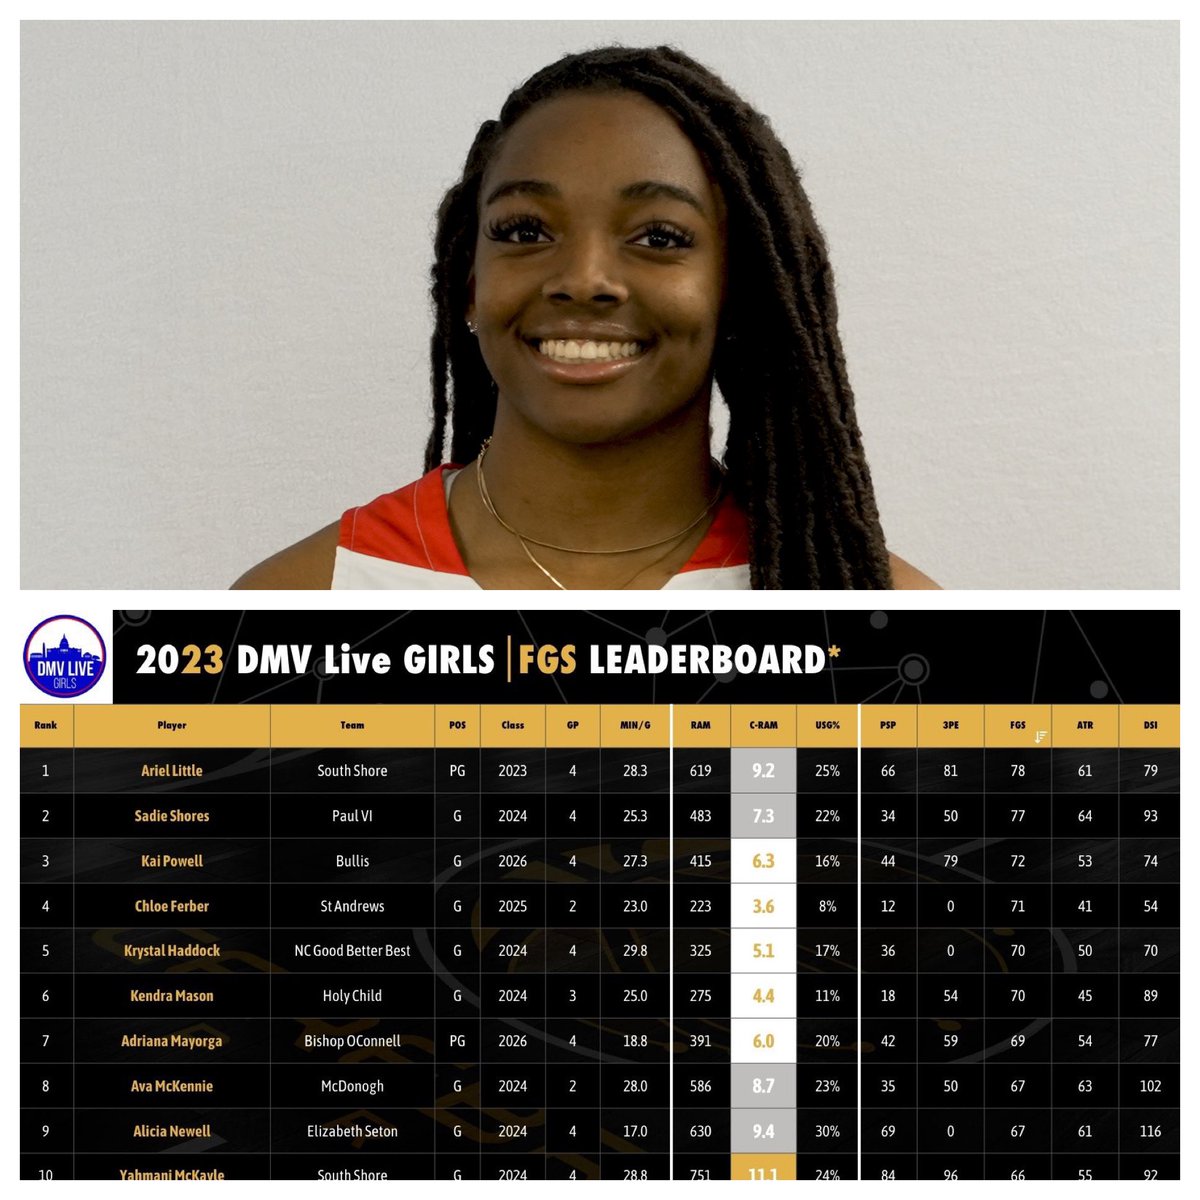 NCGBB 2024 KRYSTAL HADDOCK showed off her playmaking abilities @DMVHoopsLive ranking the 5th highest FGS (Floor General Skill) Score of all players. FGS is a playmaking skill score that combines assist volume and efficiency. @CerebroSports Krystal is a special two way player.